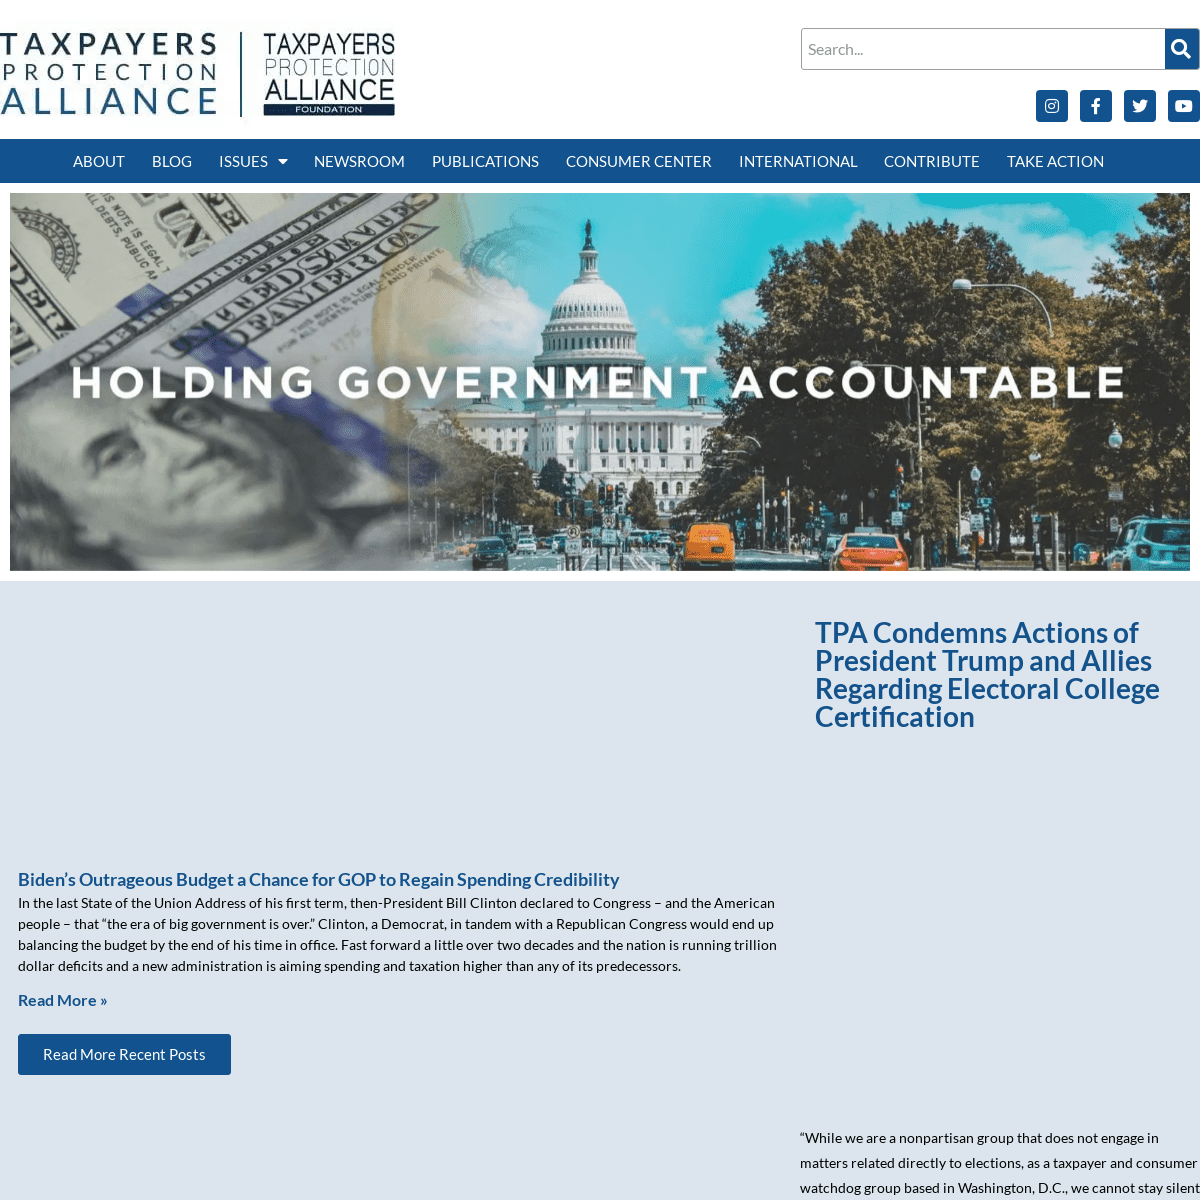 A complete backup of https://protectingtaxpayers.org